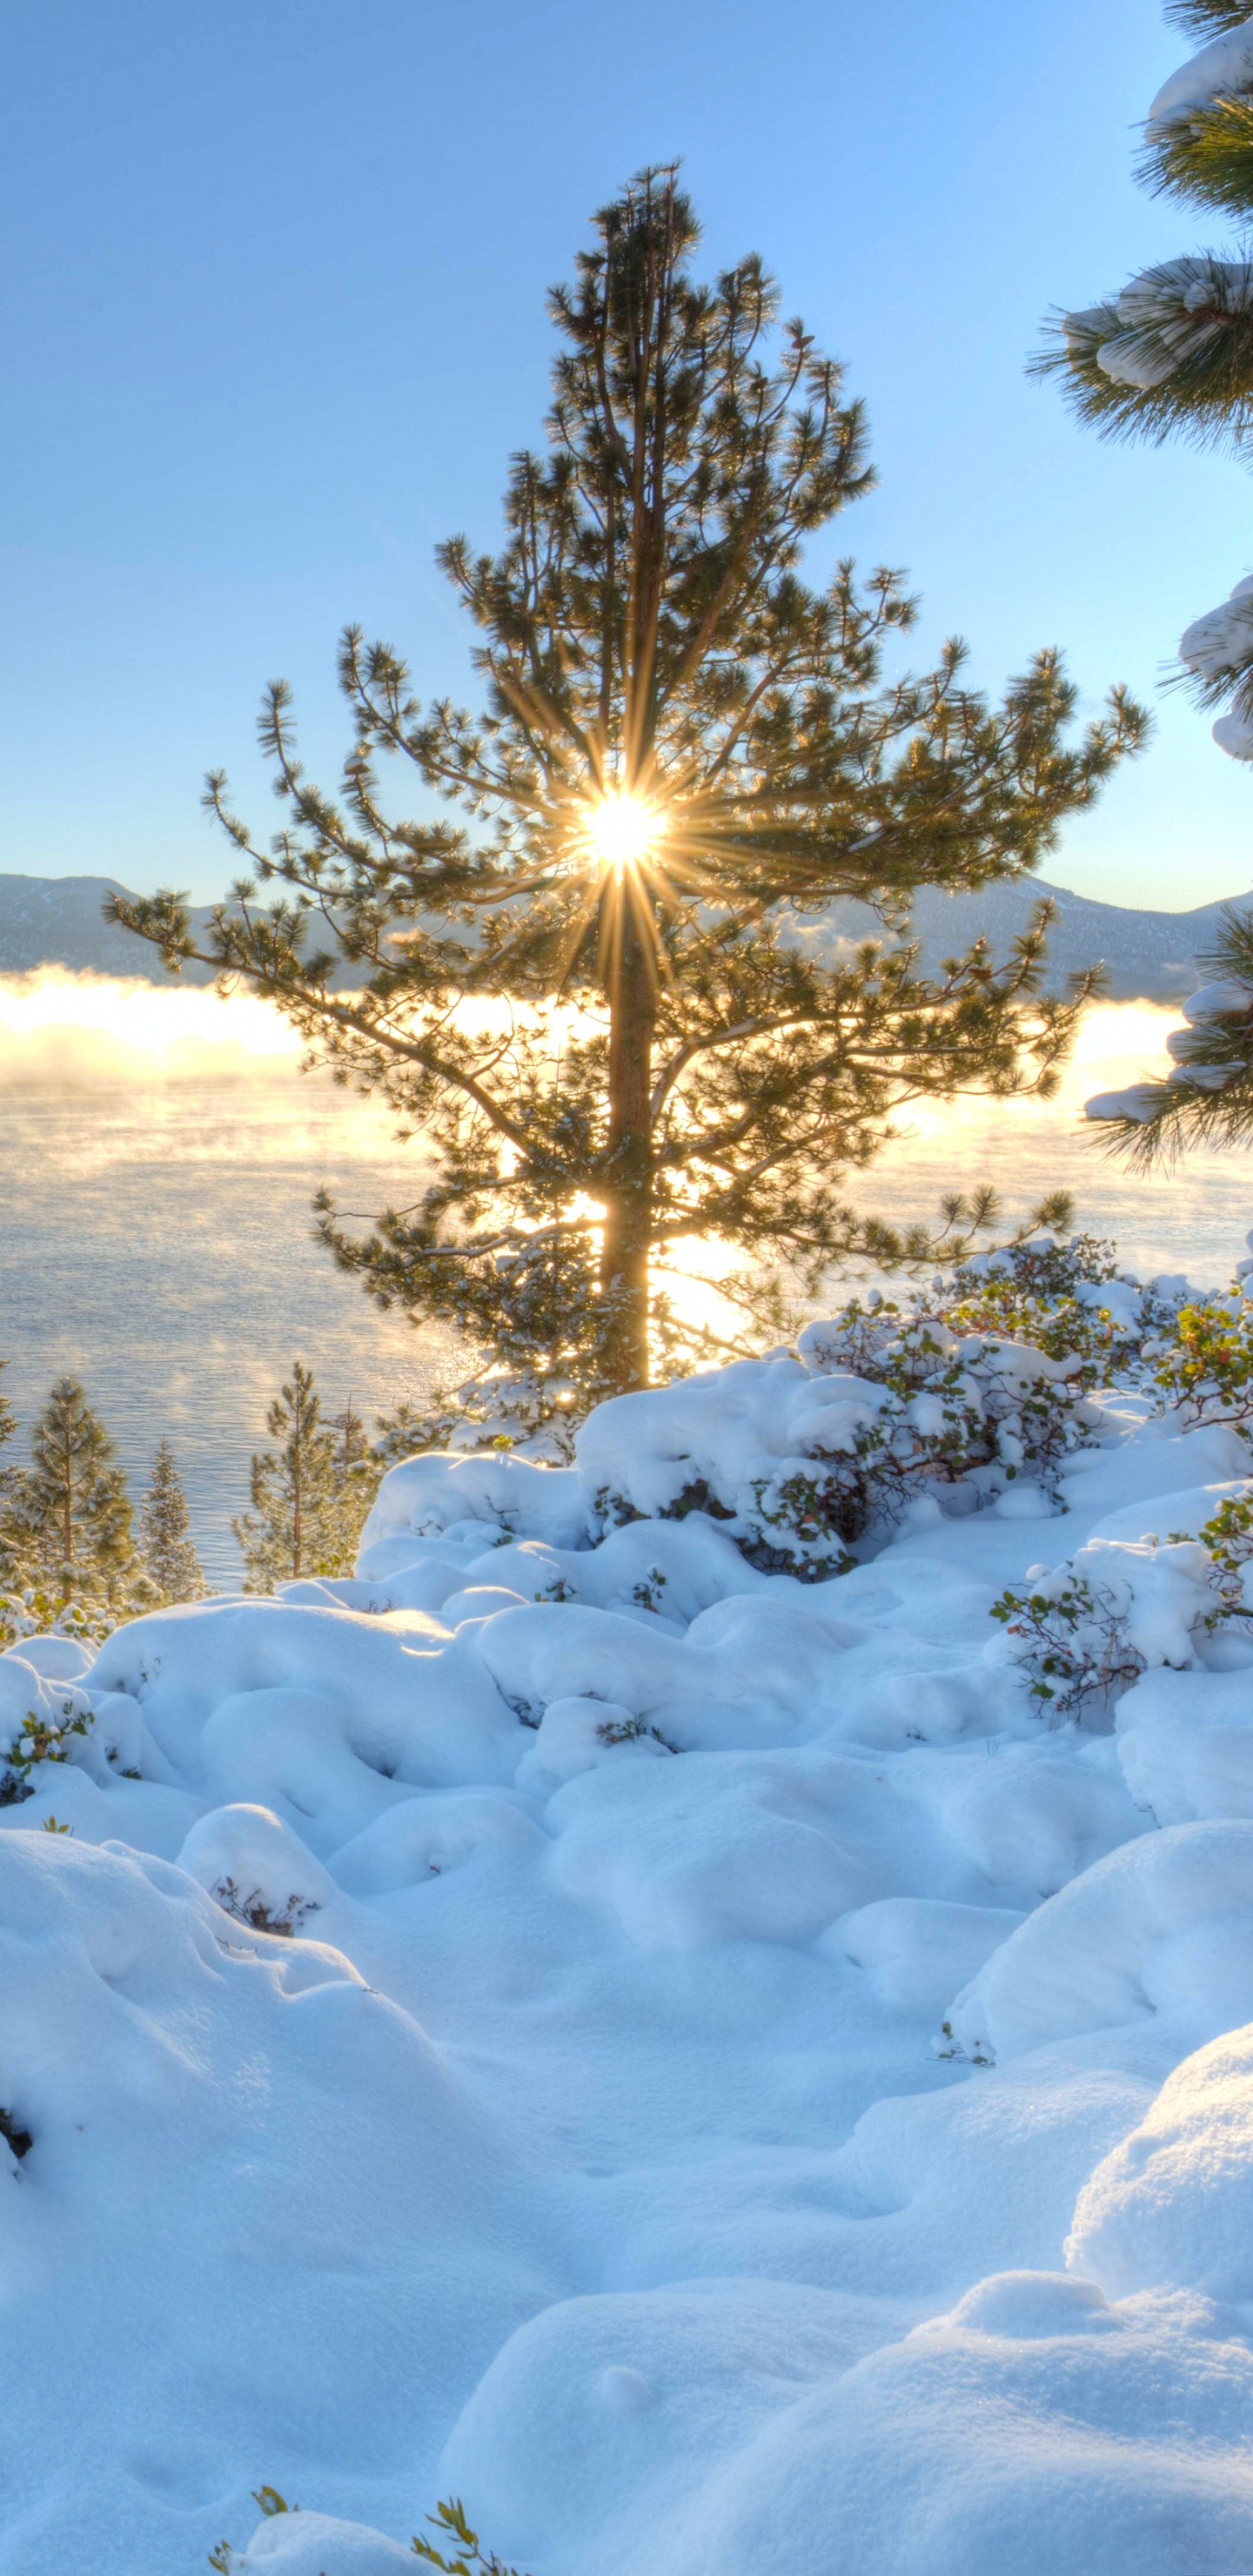 Snow Covered Field Near Green Trees and Body of Water During Daytime. Wallpaper in 1440x2960 Resolution